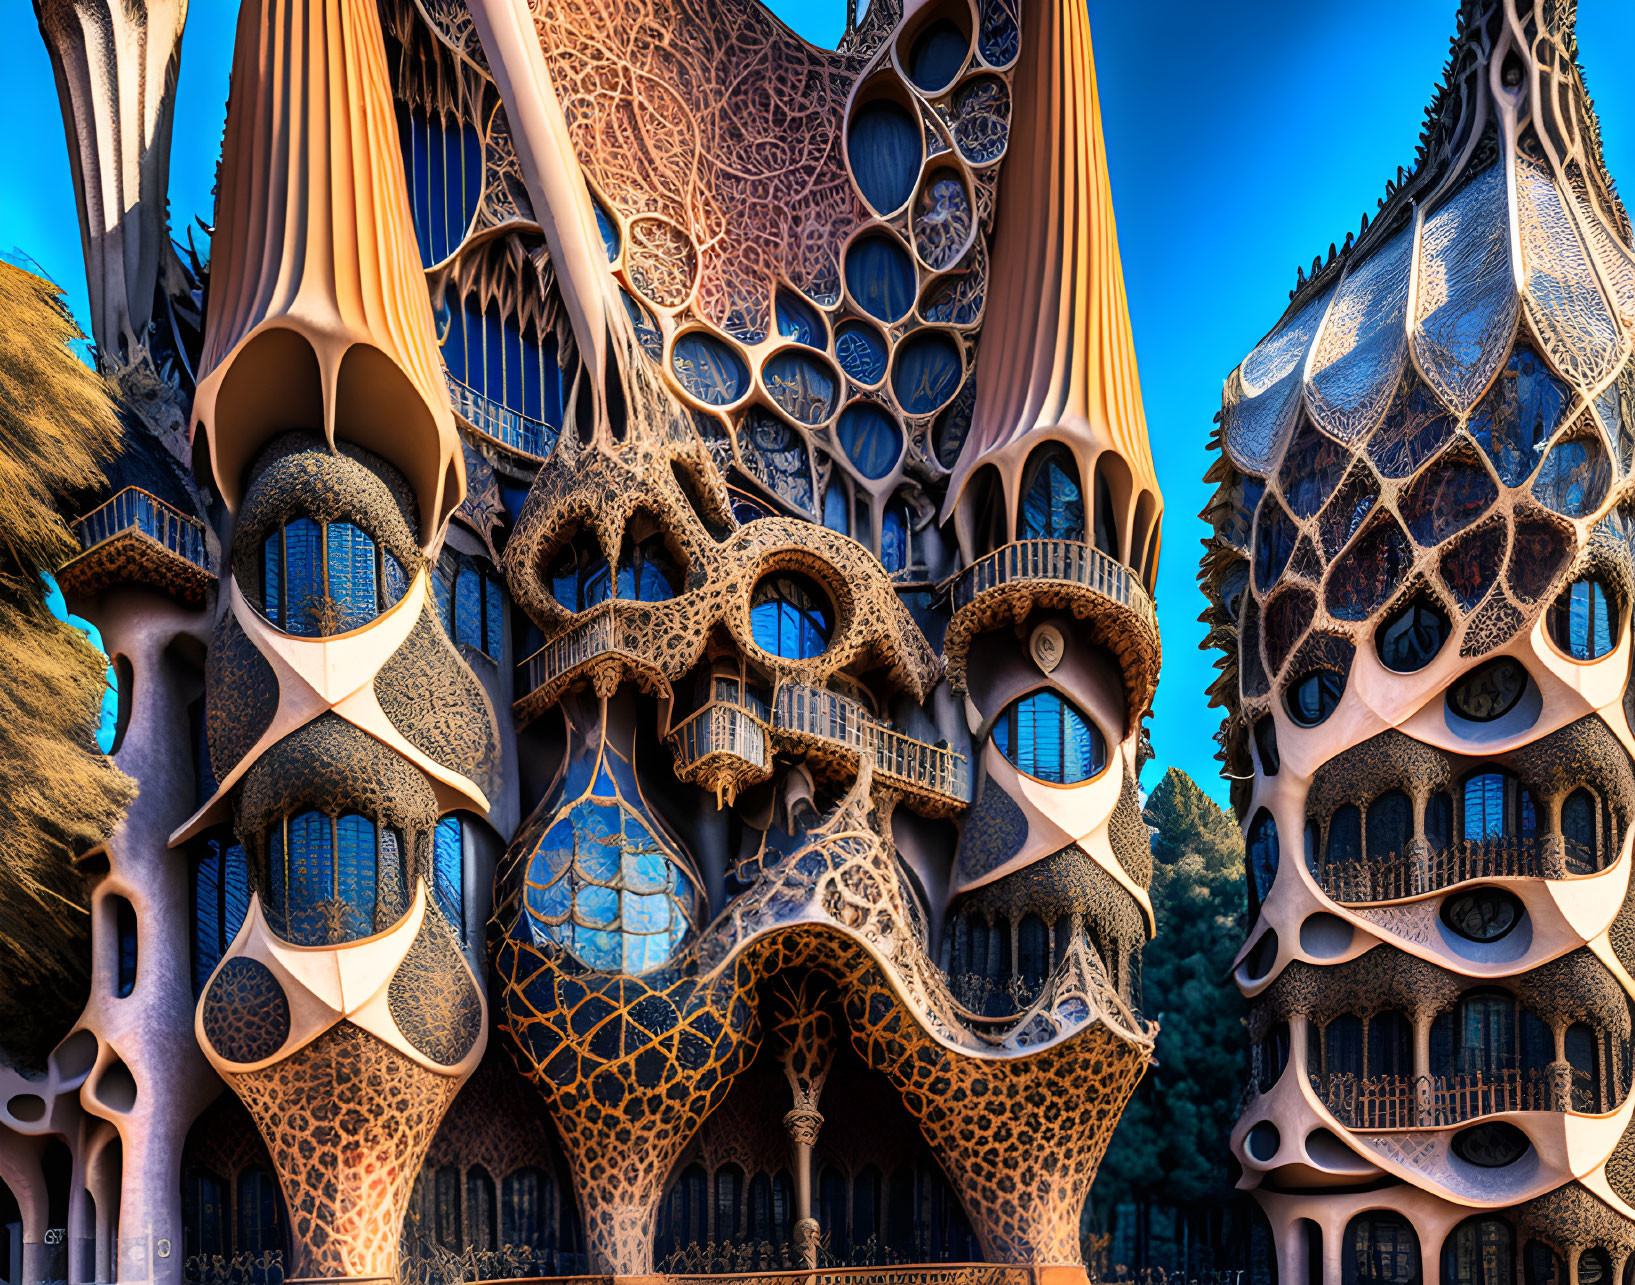 Organic fantasy architecture with bone-like structures and honeycomb patterns under blue sky